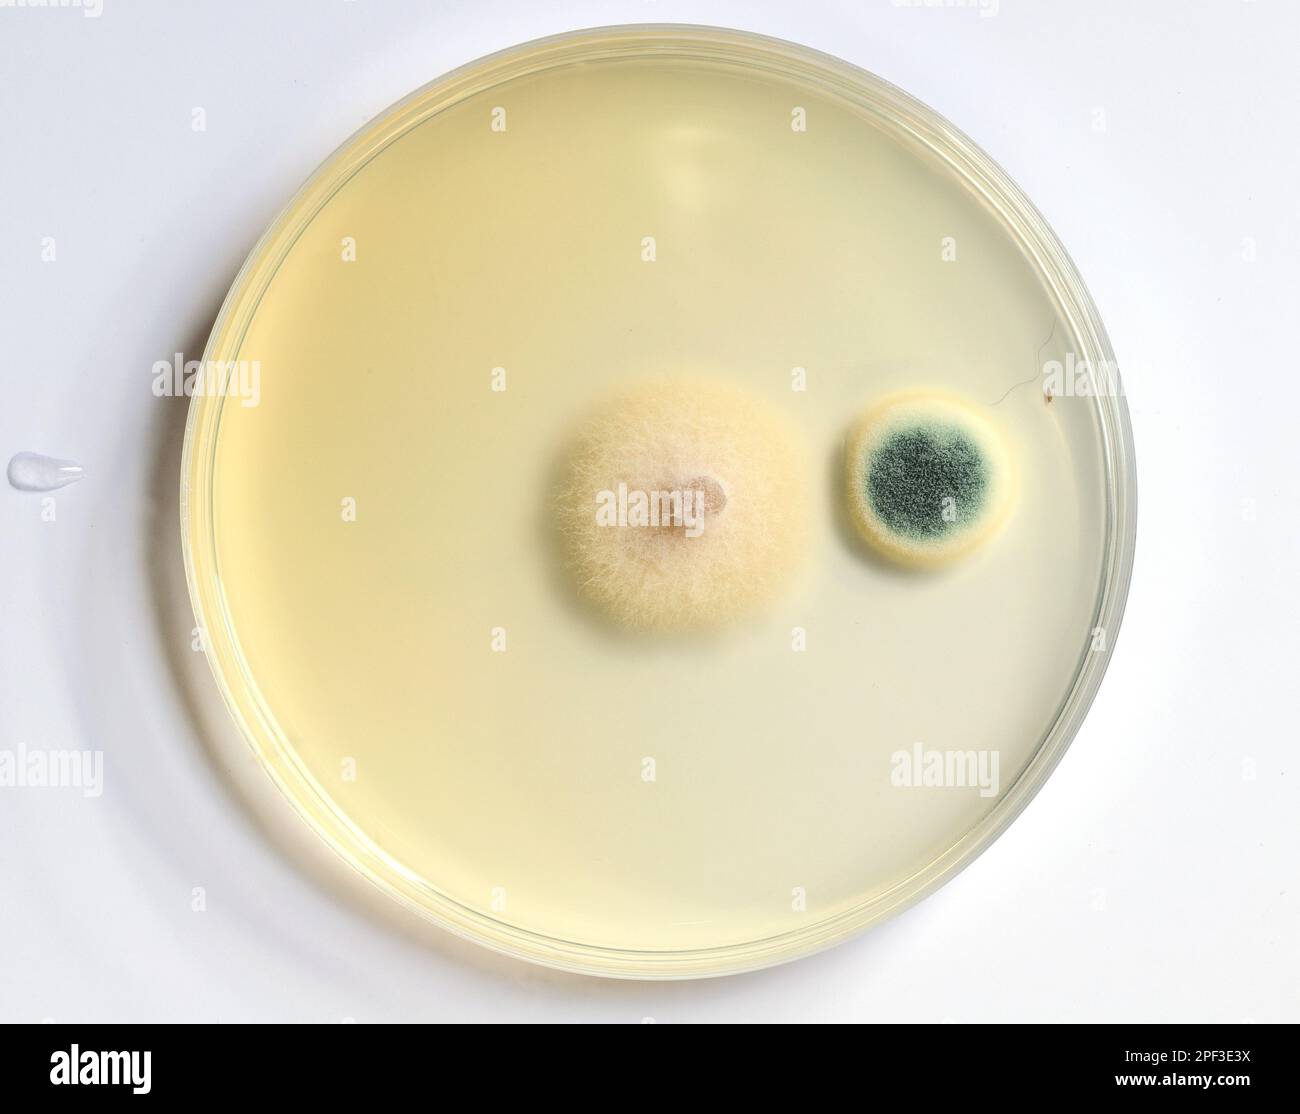 growth of microorganisms in a Petri dish, Bacteria, yeast and mold growing on an agar plate. Stock Photo